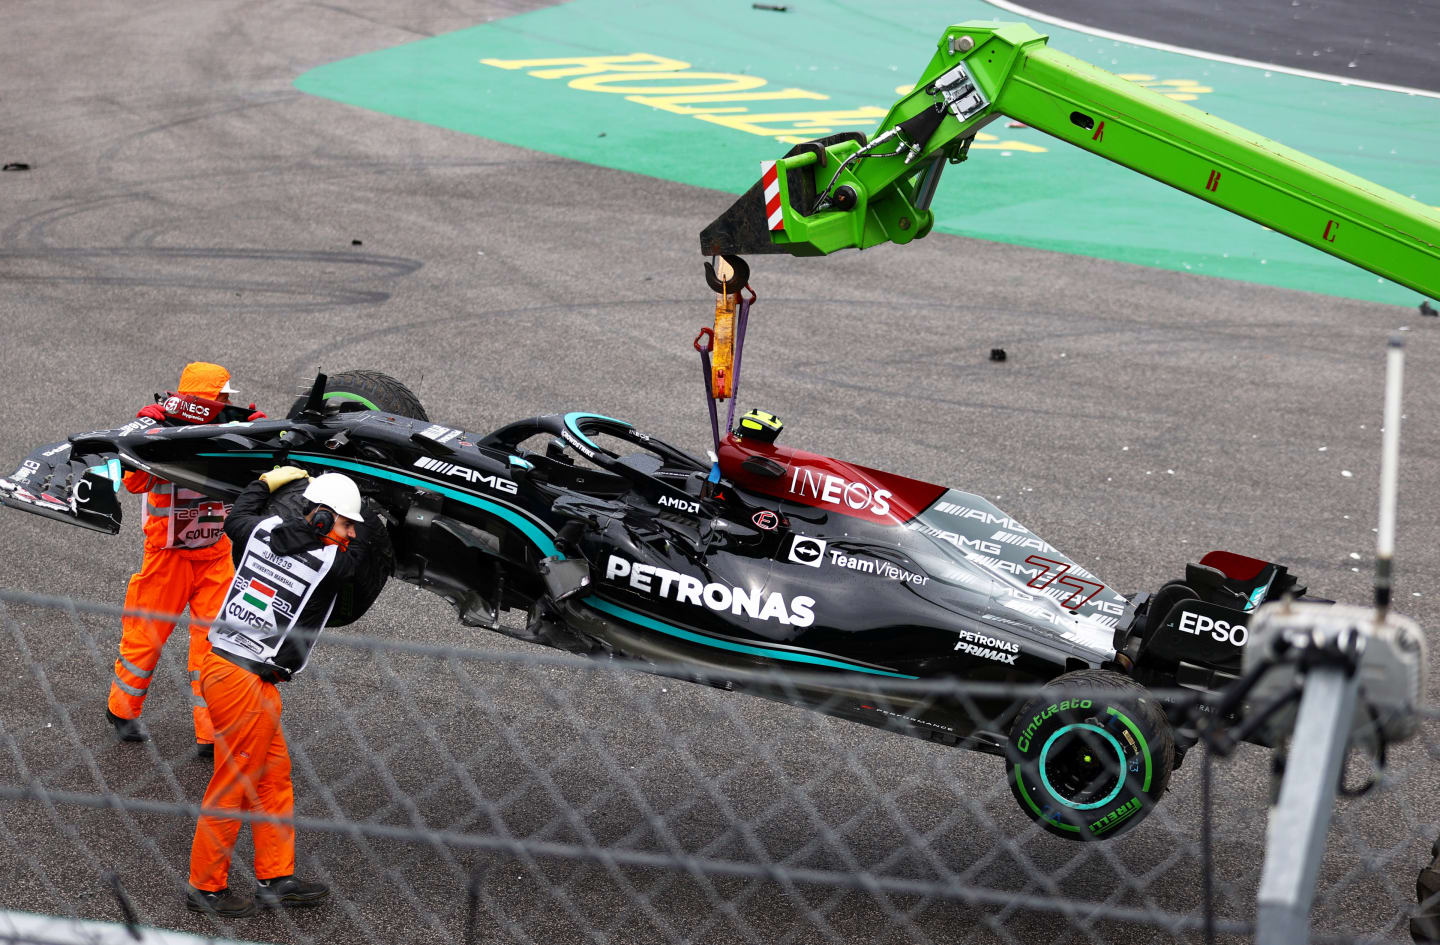 BUDAPEST, HUNGARY - AUGUST 01: The car of Valtteri Bottas of Finland and Mercedes GP is removed from the track during the F1 Grand Prix of Hungary at Hungaroring on August 01, 2021 in Budapest, Hungary. (Photo by Bryn Lennon/Getty Images)